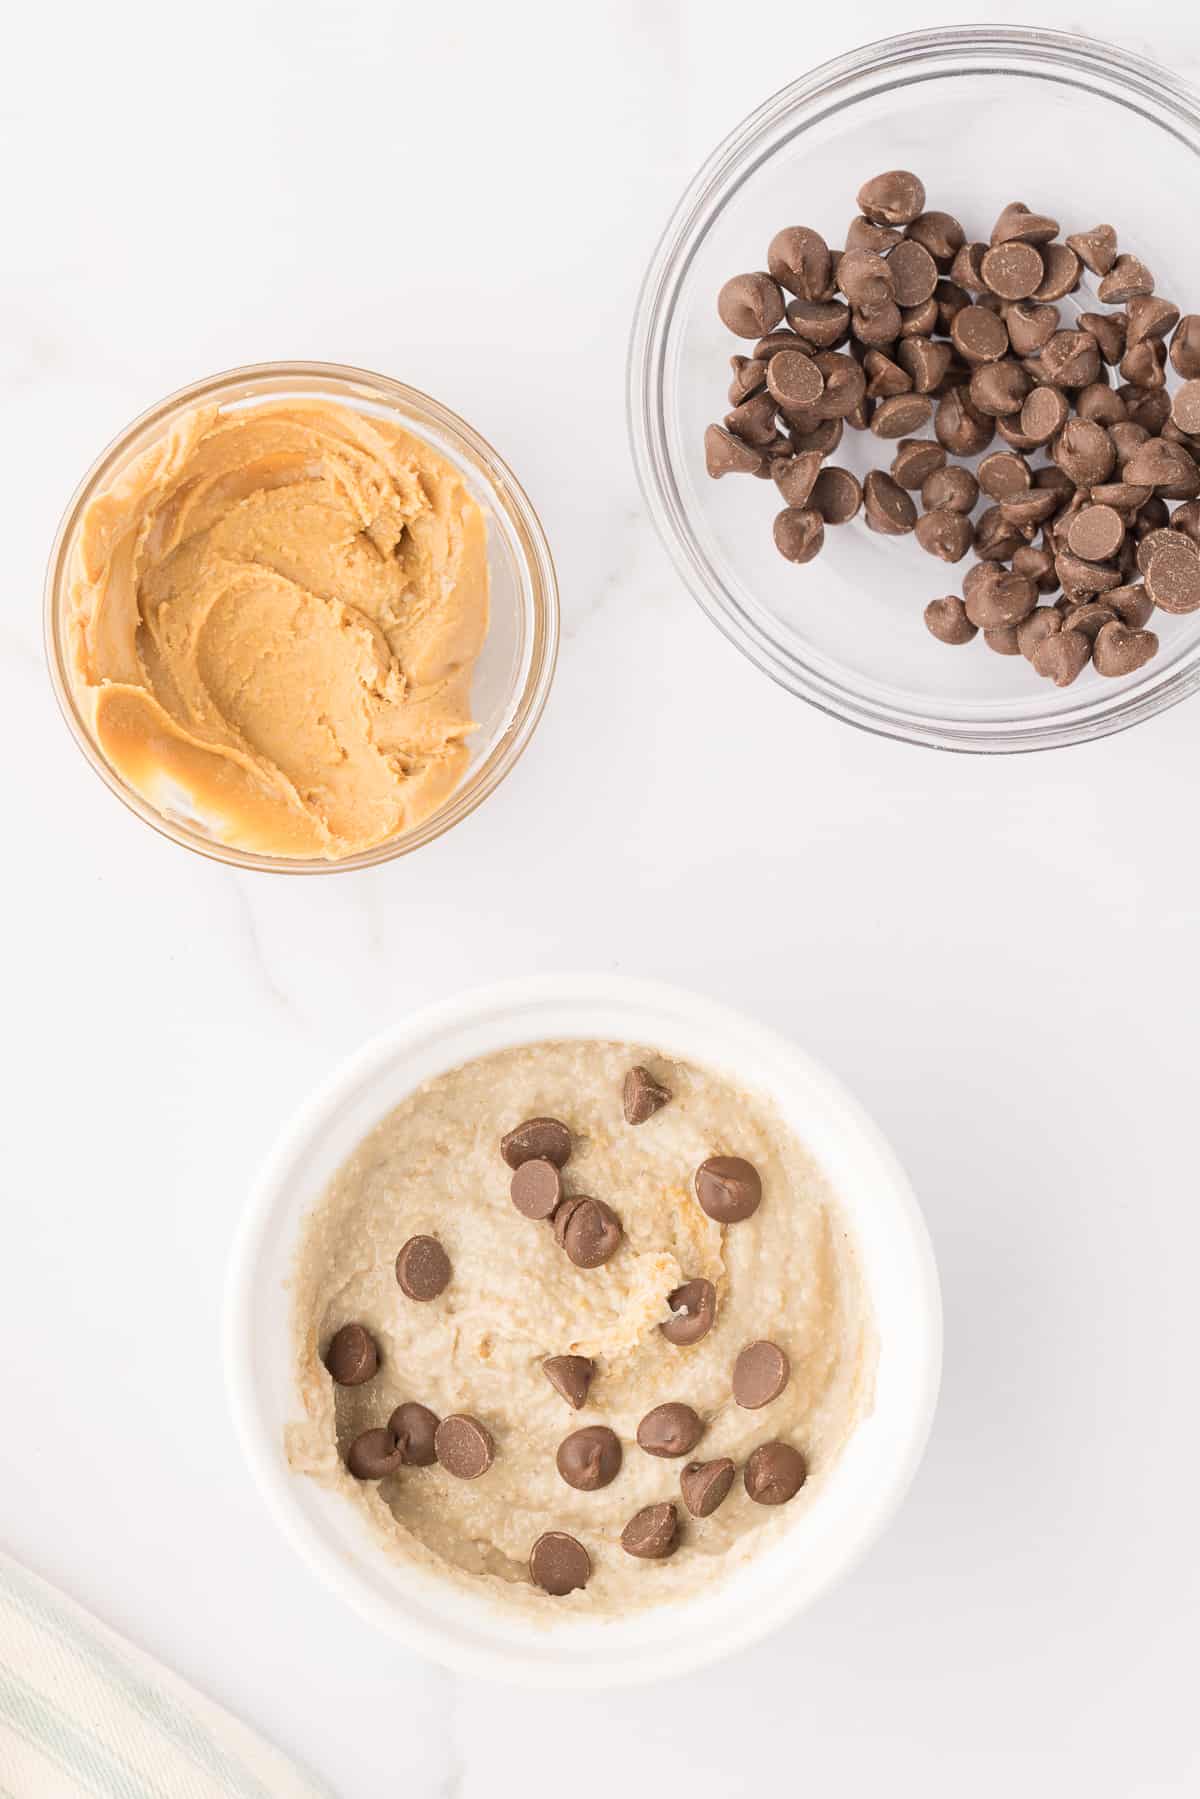 Blended oatmeal topped with chocolate chips in a ramekin with small bowls of peanut butter and chocolate chips around it.